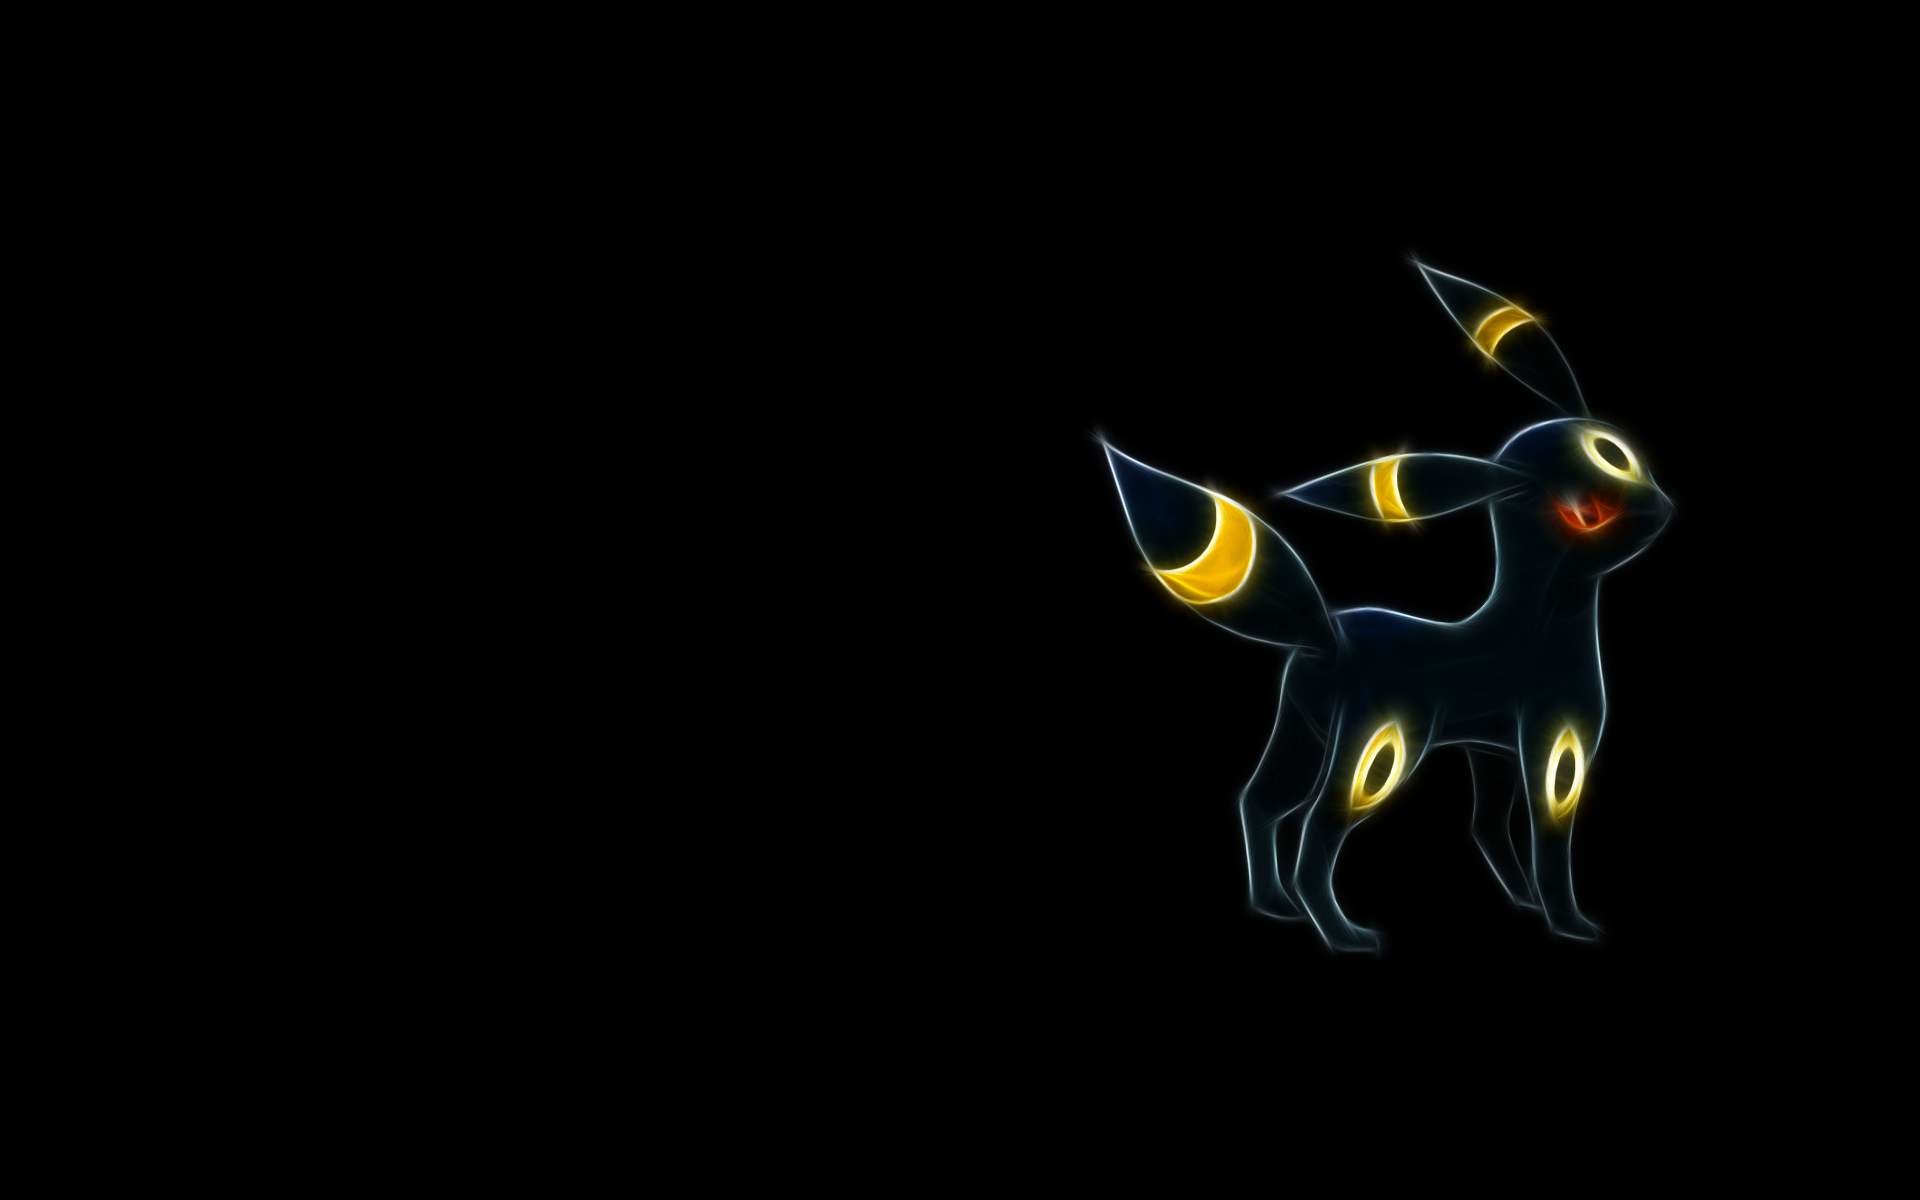 1920x1200 Umbreon Wallpapers - Full HD wallpaper search